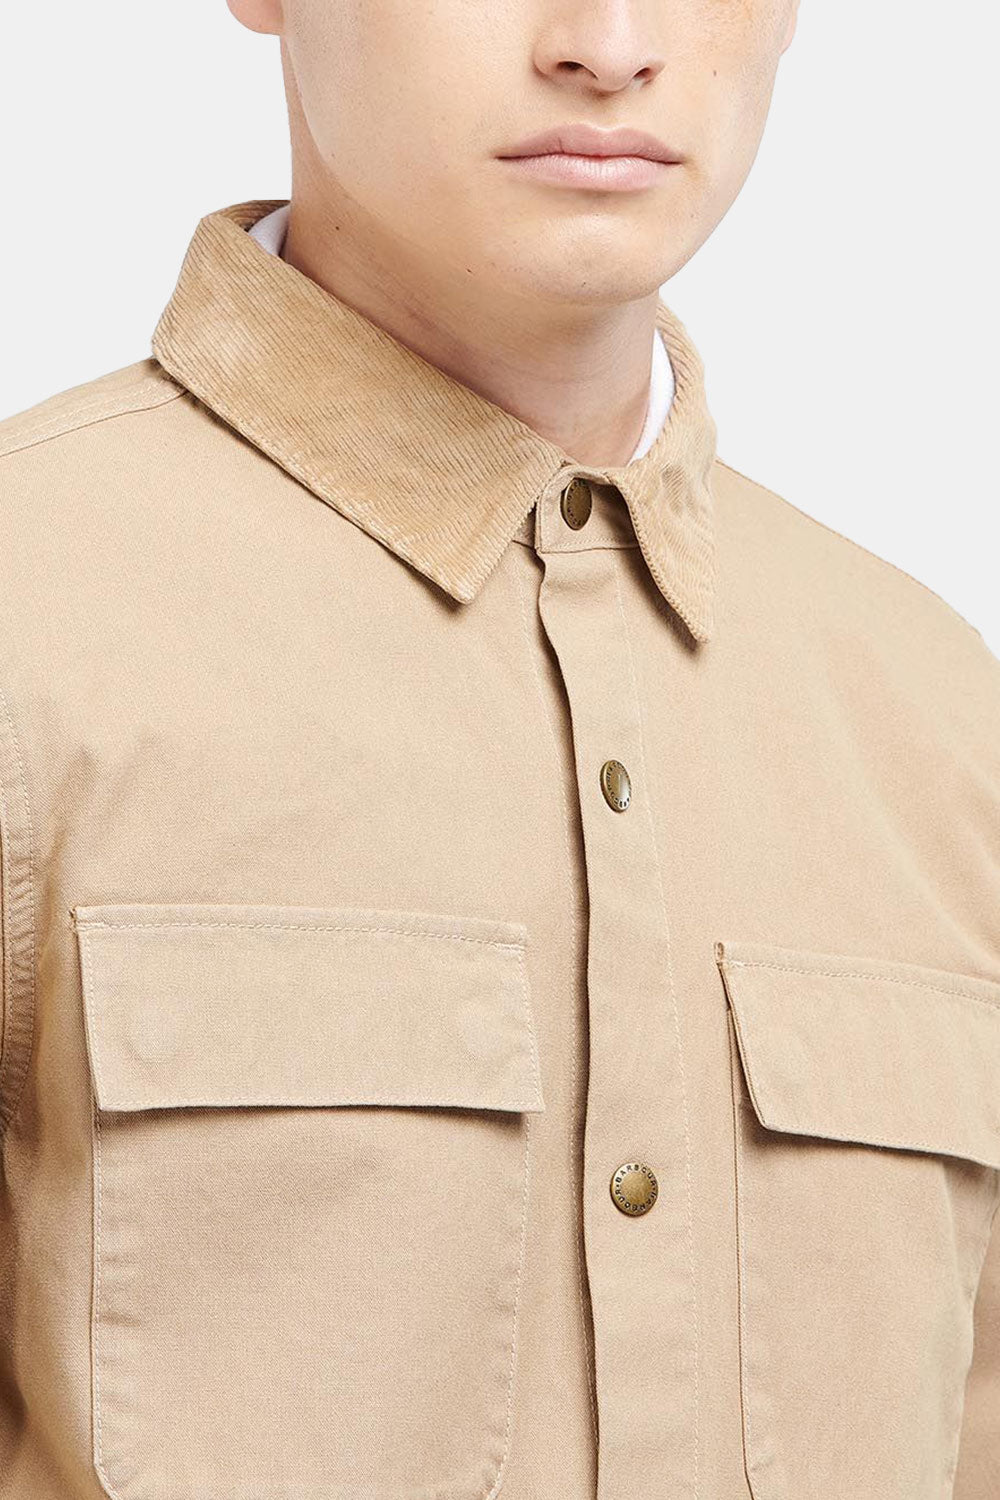 Barbour White Label Nico Heavy Washed Overshirt (Sand)